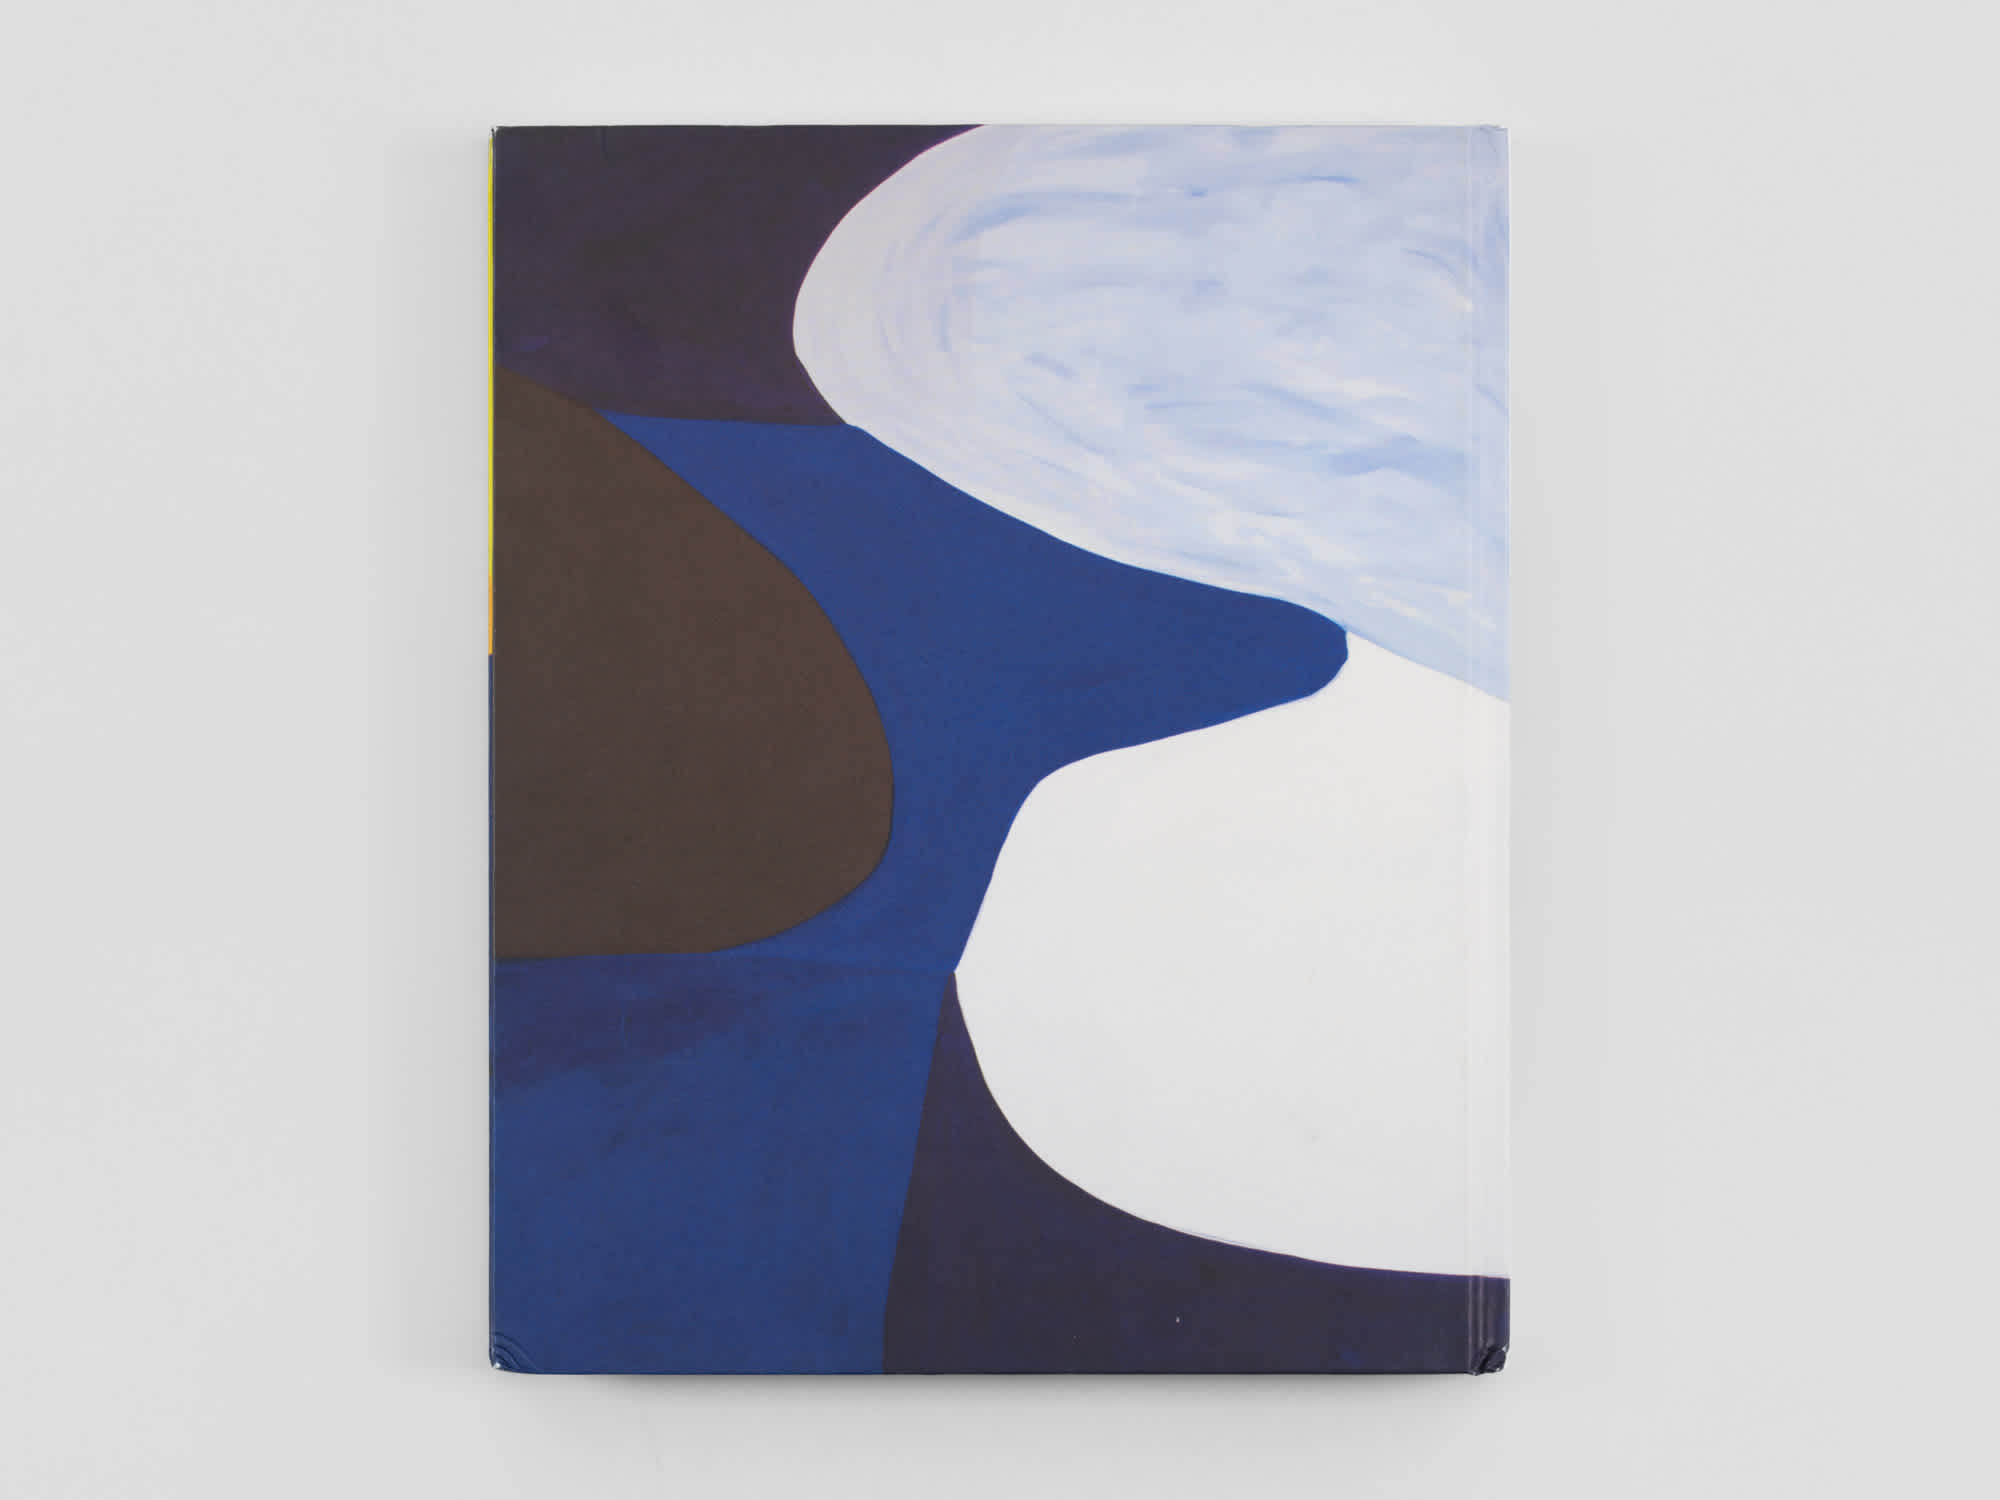 Back cover of a book painted with varying hues of blue rounded shapes.